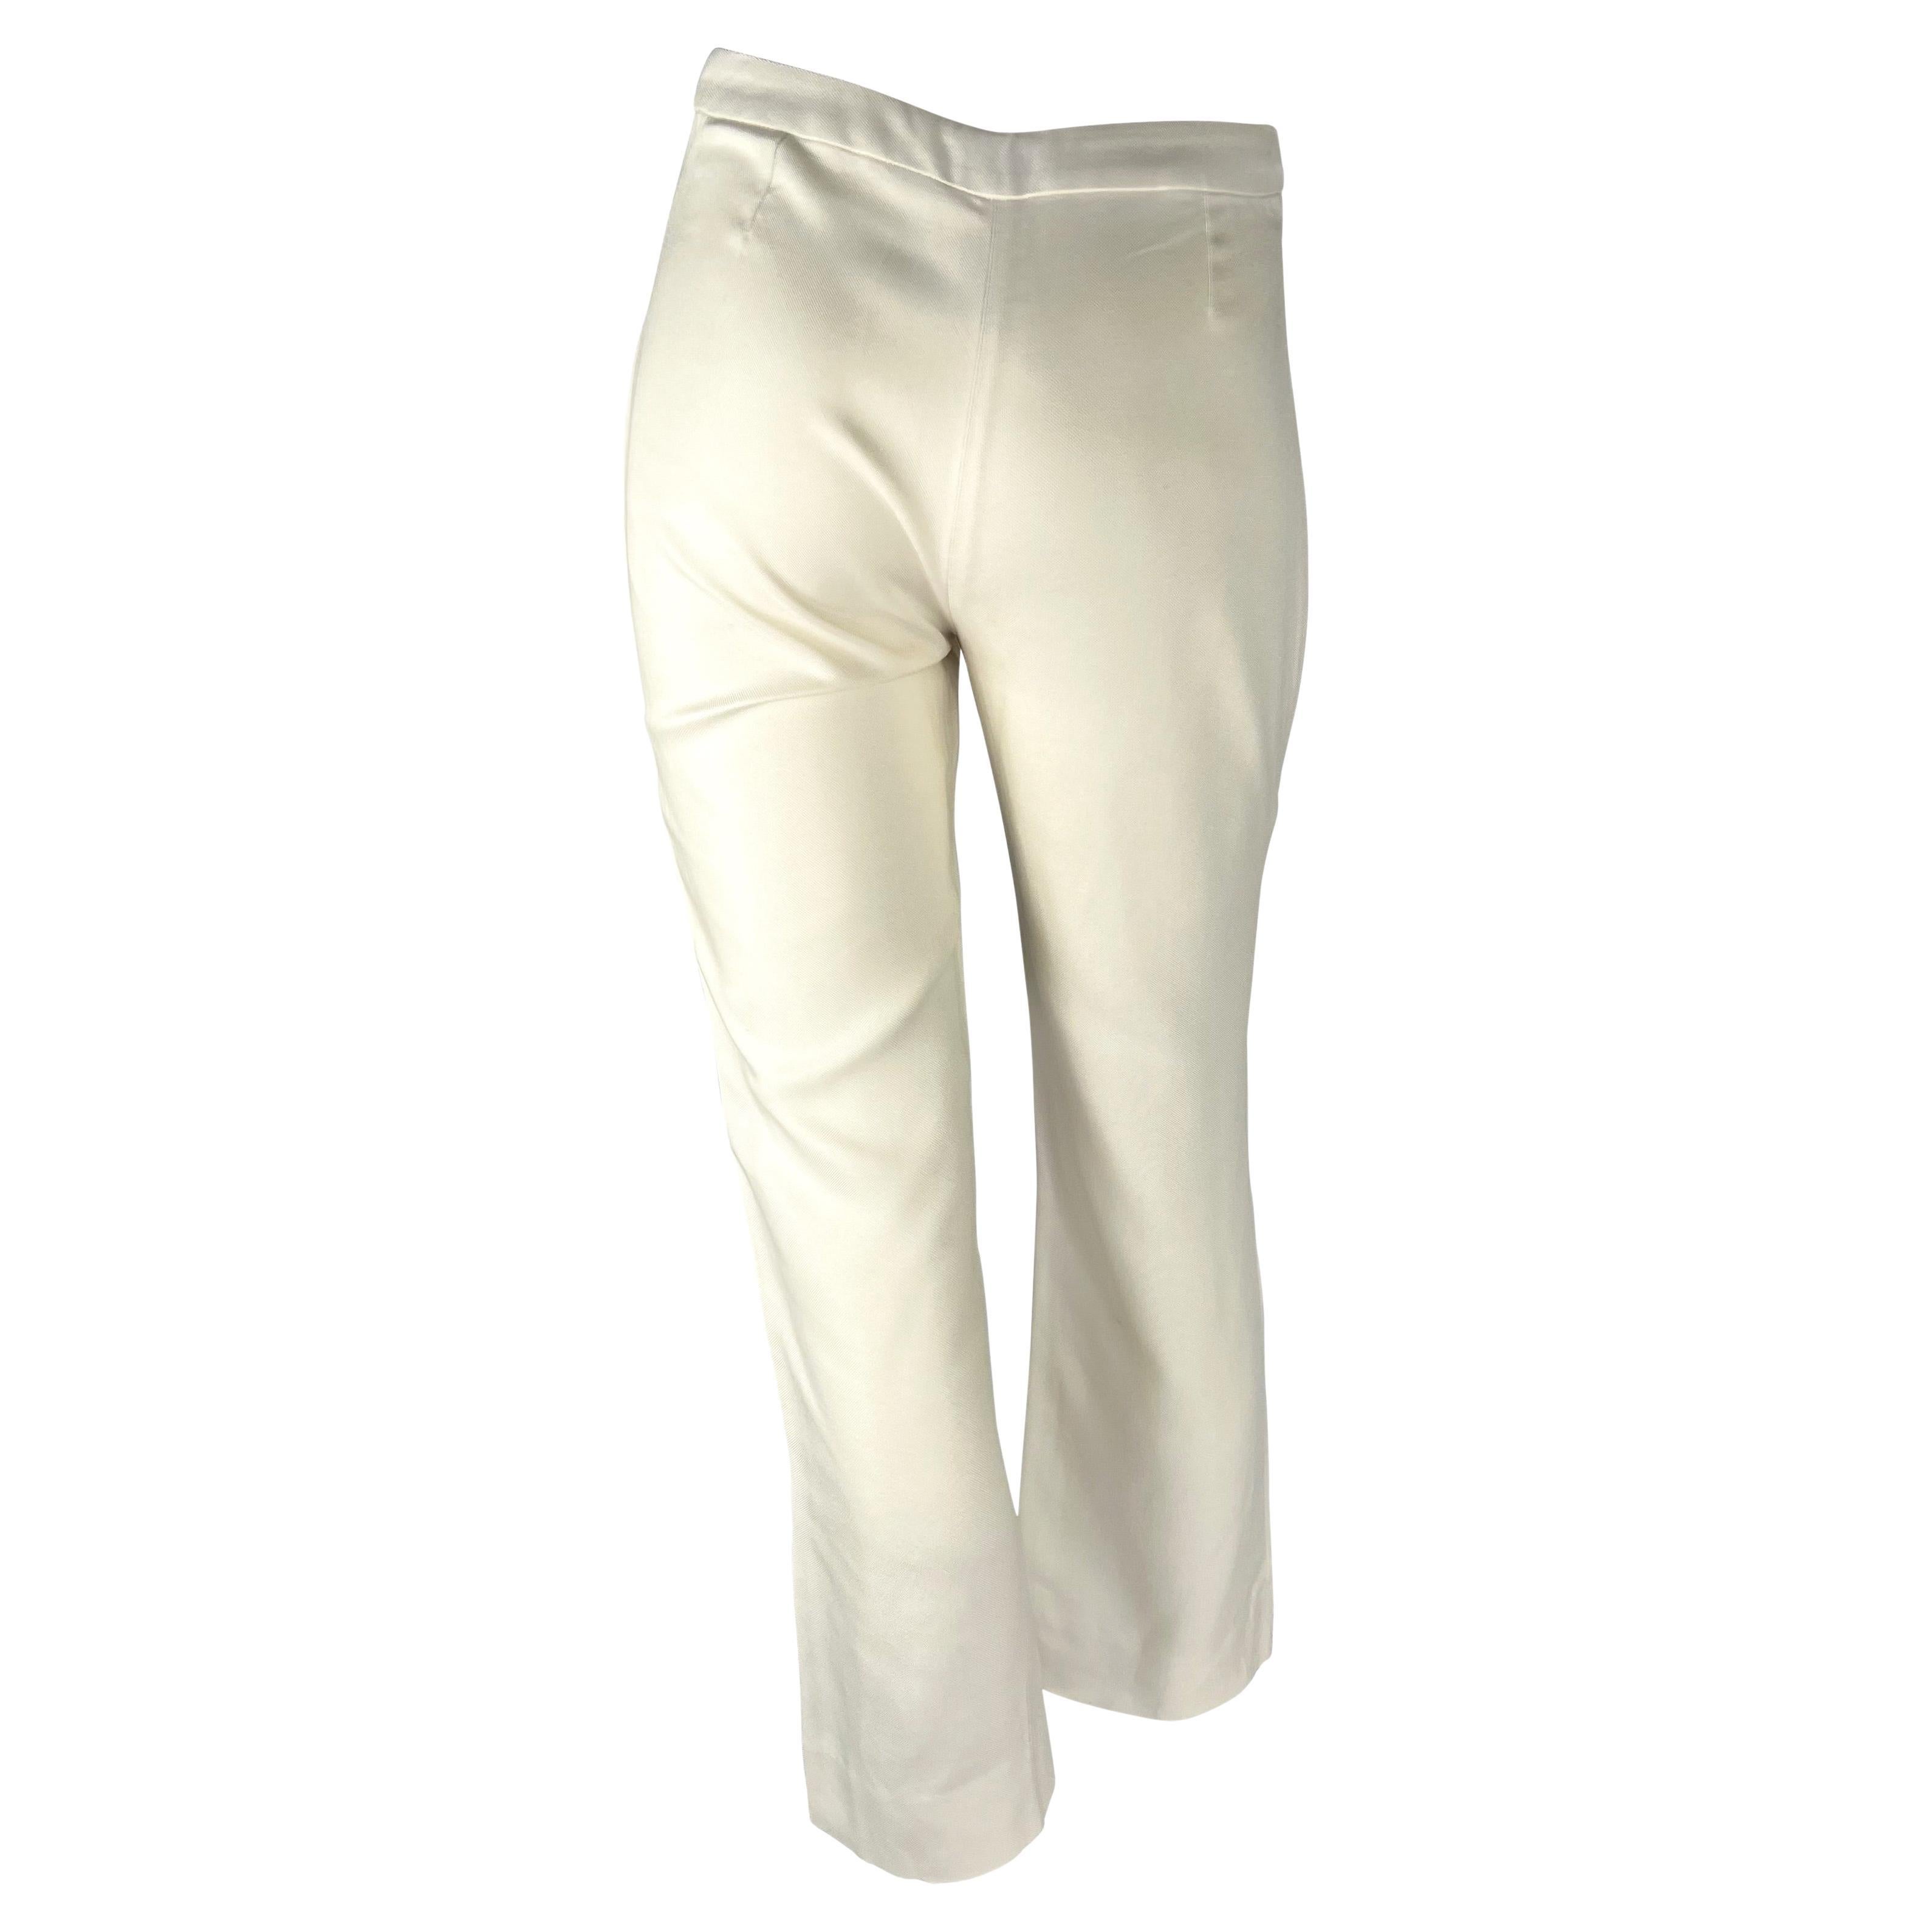 S/S 2000 Gianni Versace by Donatella Off-White Silk Tapered Pants In Excellent Condition For Sale In West Hollywood, CA